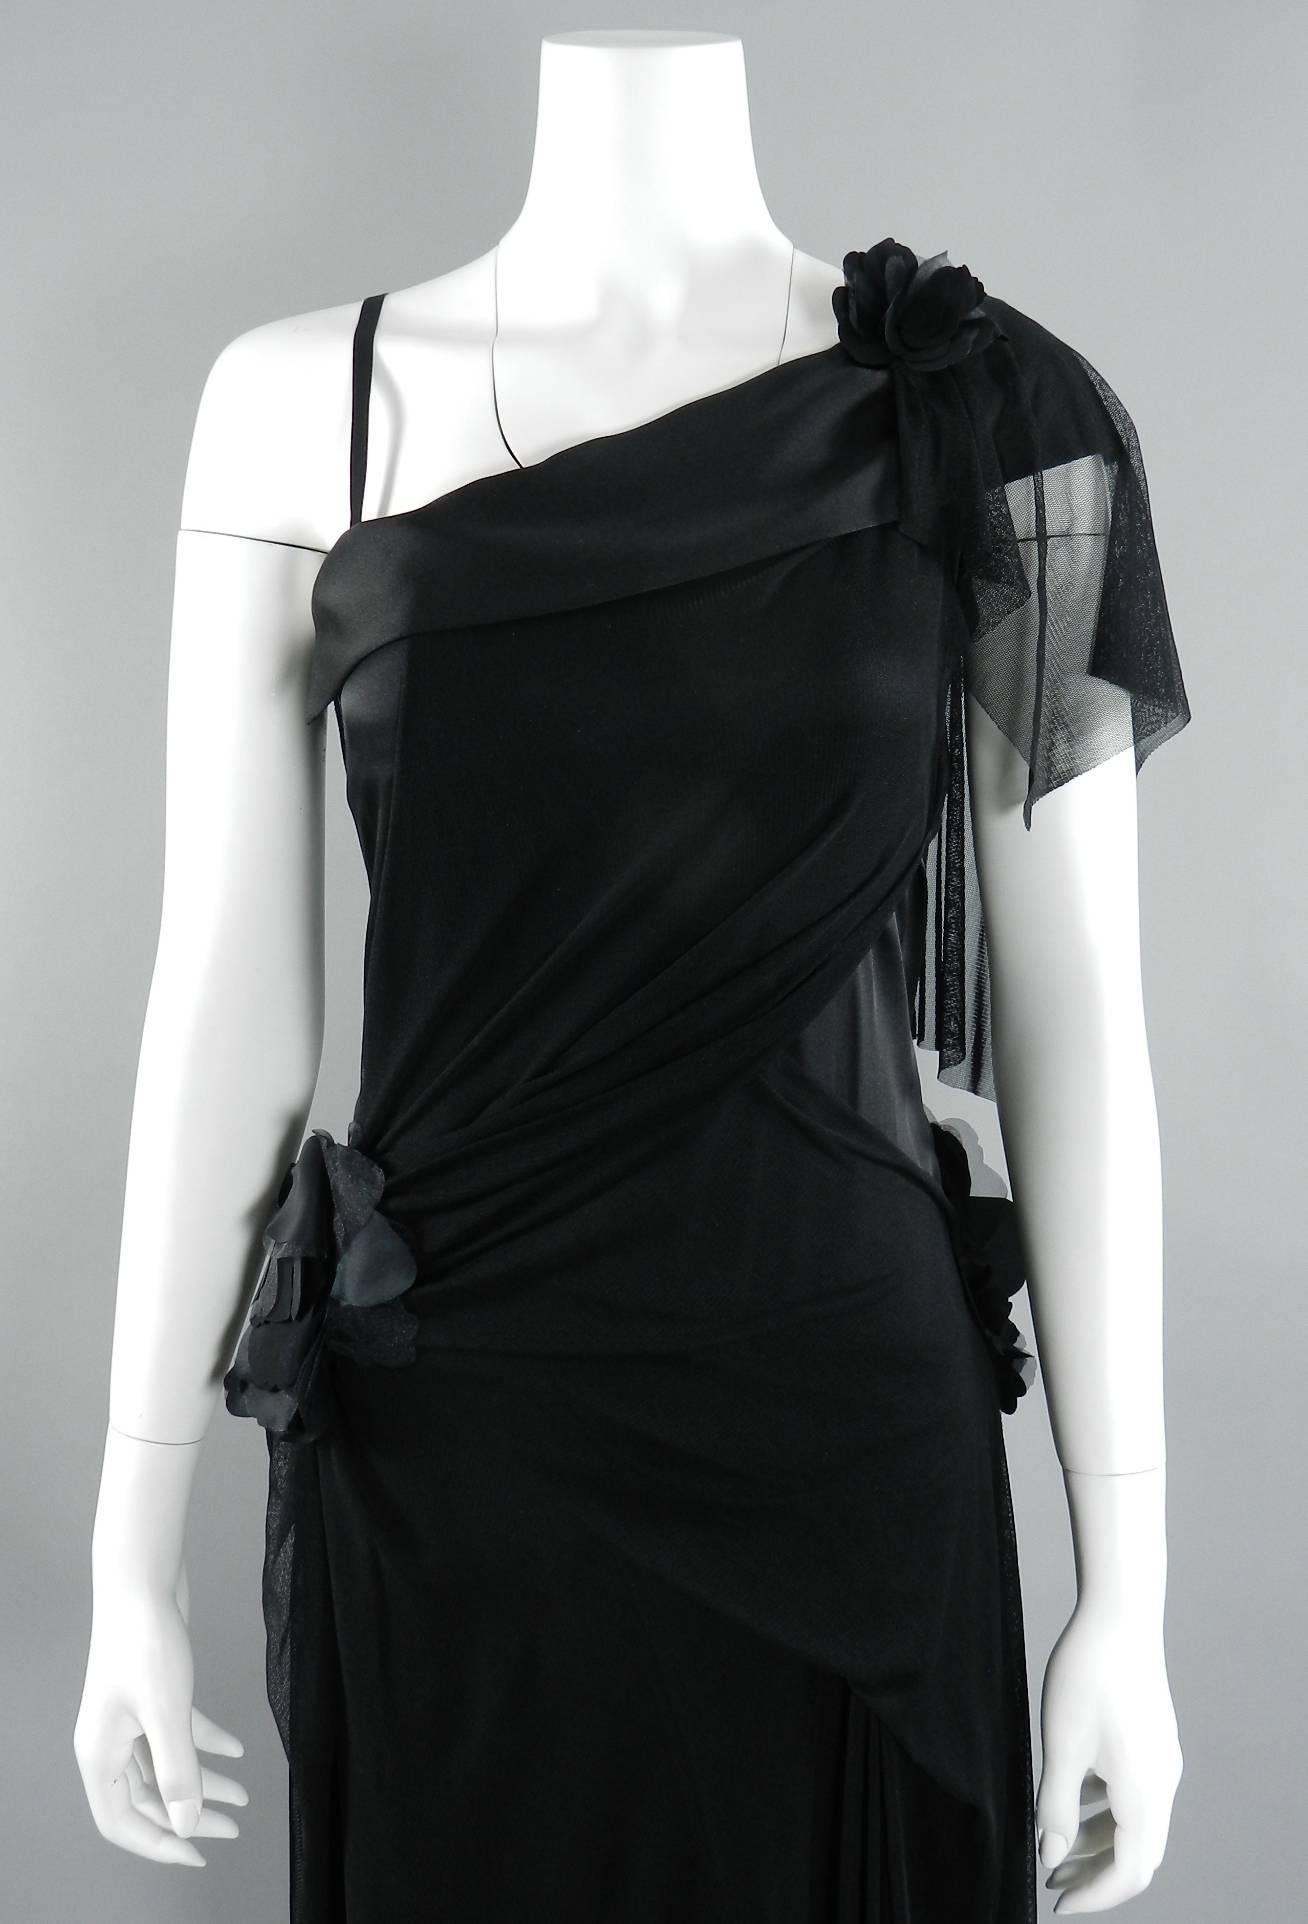 Issey Miyake black silk and mesh dress. 1920's flapper inspired design with flowers. One shoulder, invisible side zipper, layered sheer mesh, straight cut. 100% silk. Tagged Miyake size 3 (USA size 6). To fit 34